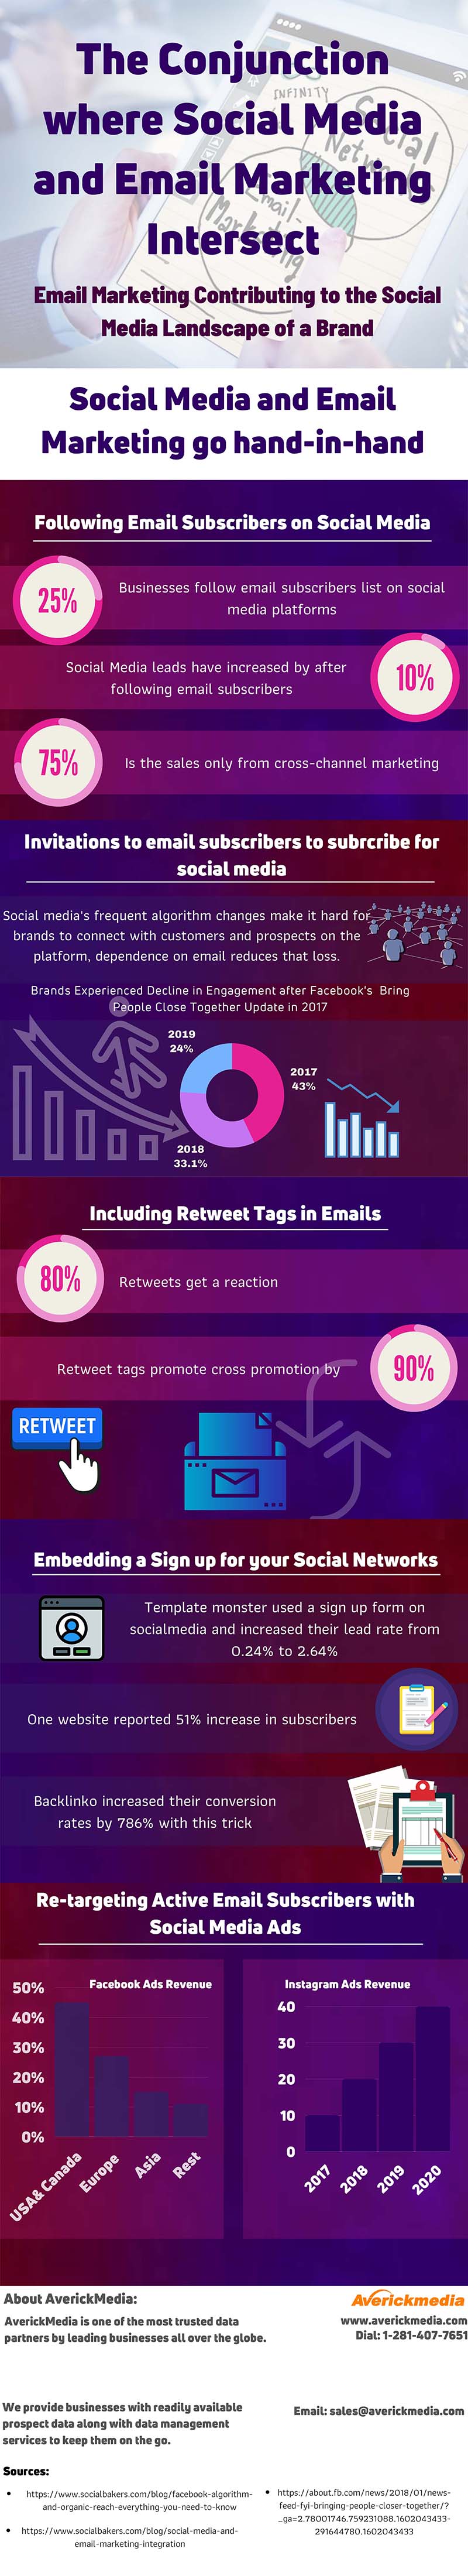 infographic-the-conjunction-where-social-media-and-email-marketing-intersect